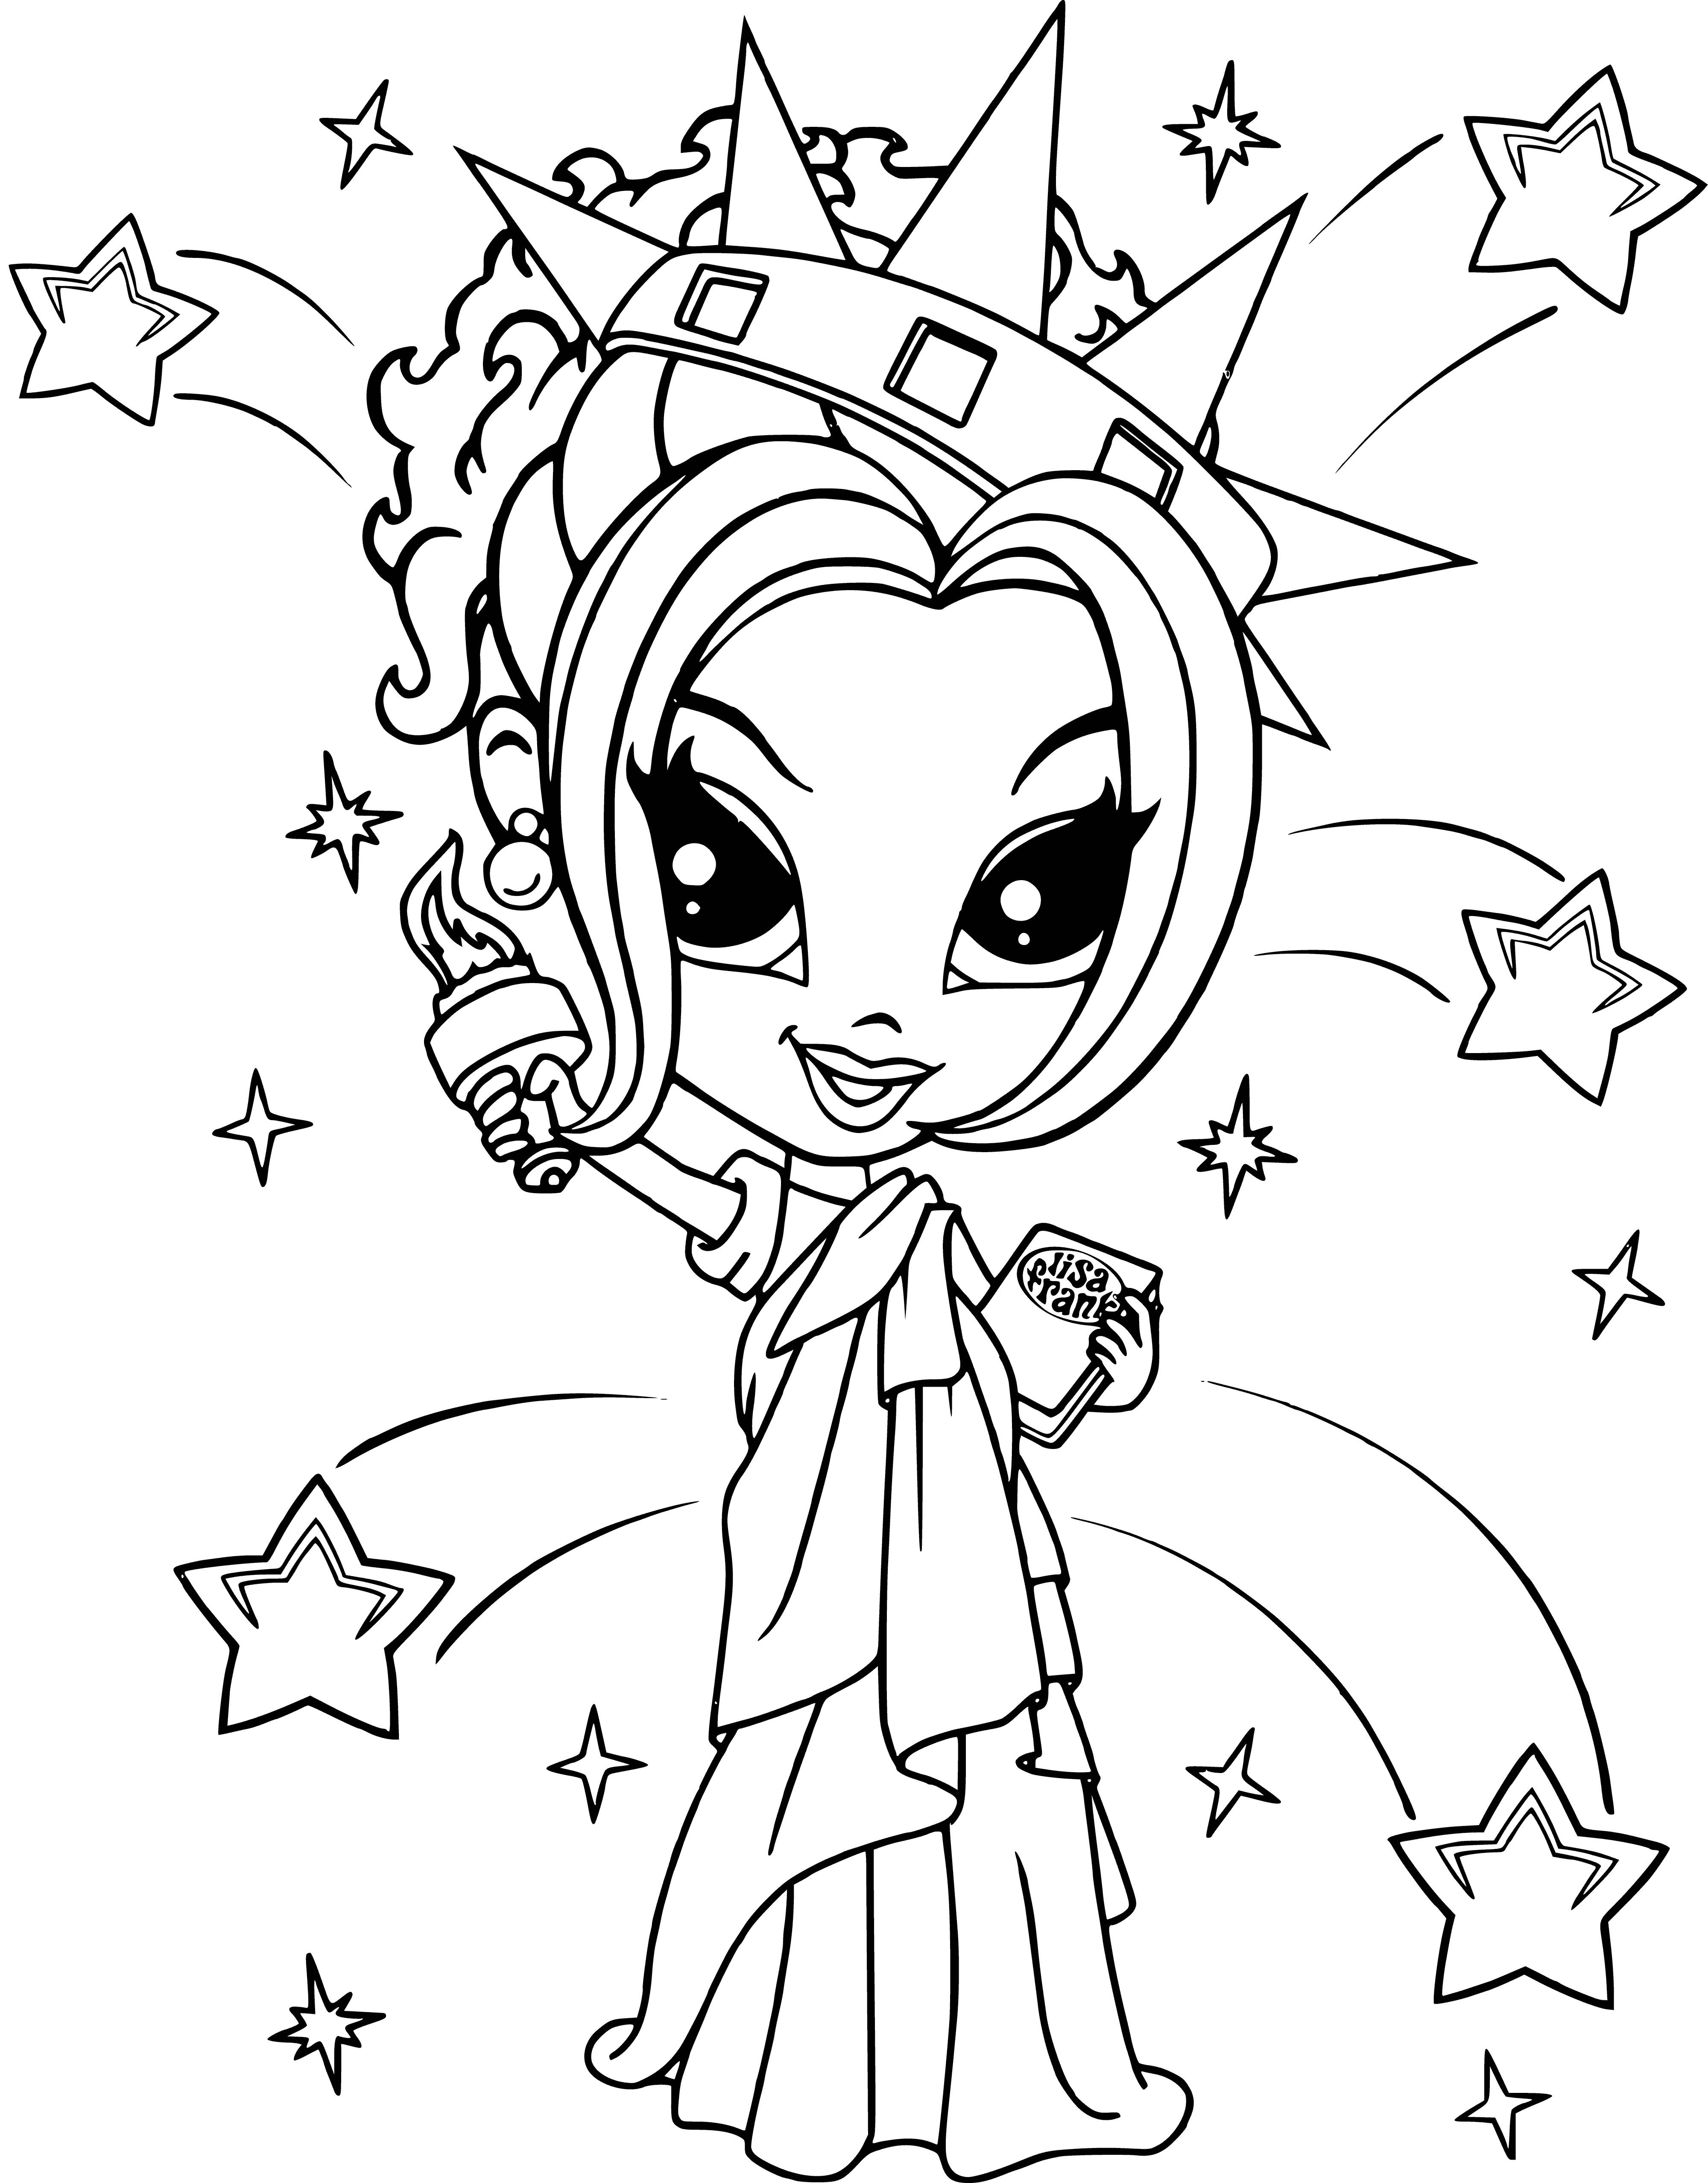 coloring page: Girl in pink dress and purple jacket, string of pearls, looking over shoulder and holding a pink purse.